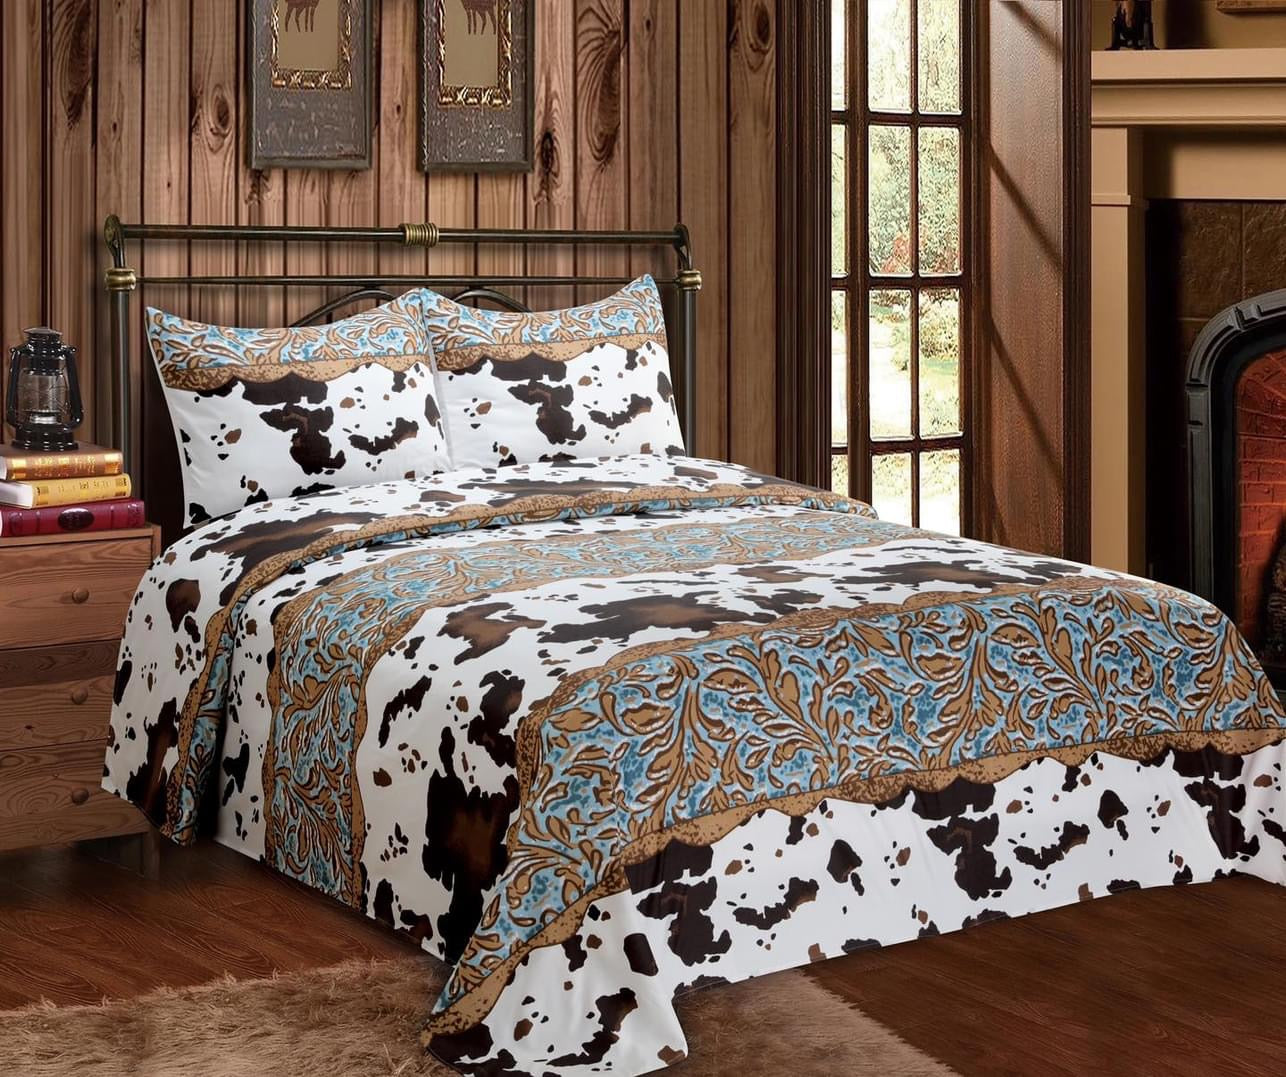 Cowhide & Tooled Leather Sheet Set